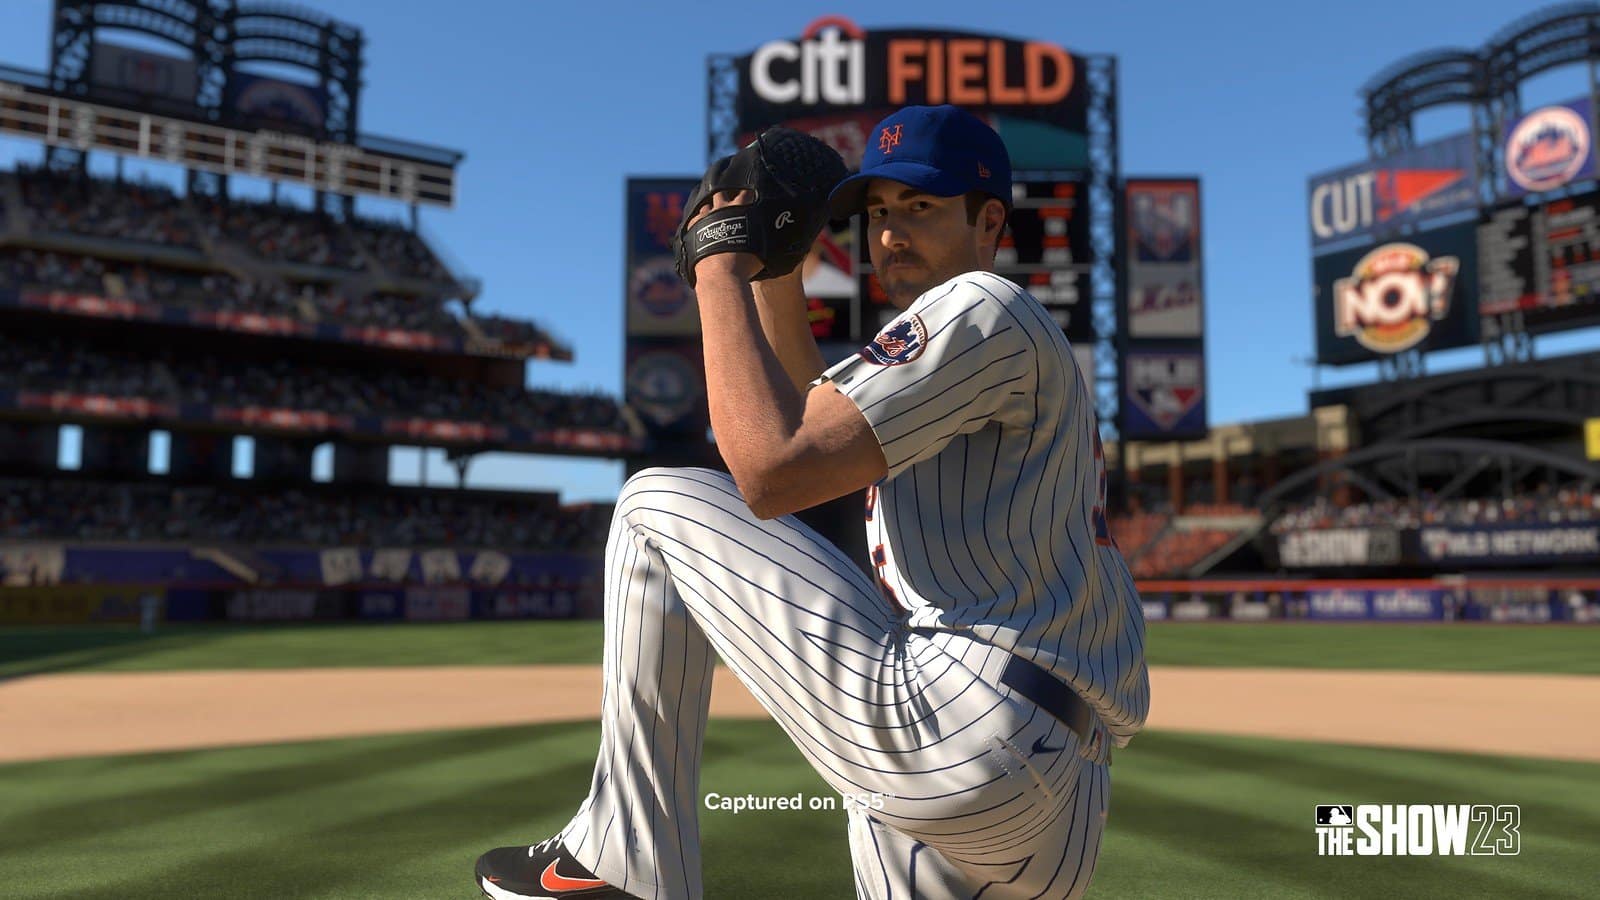 MLB The Show 23 Update 1.18